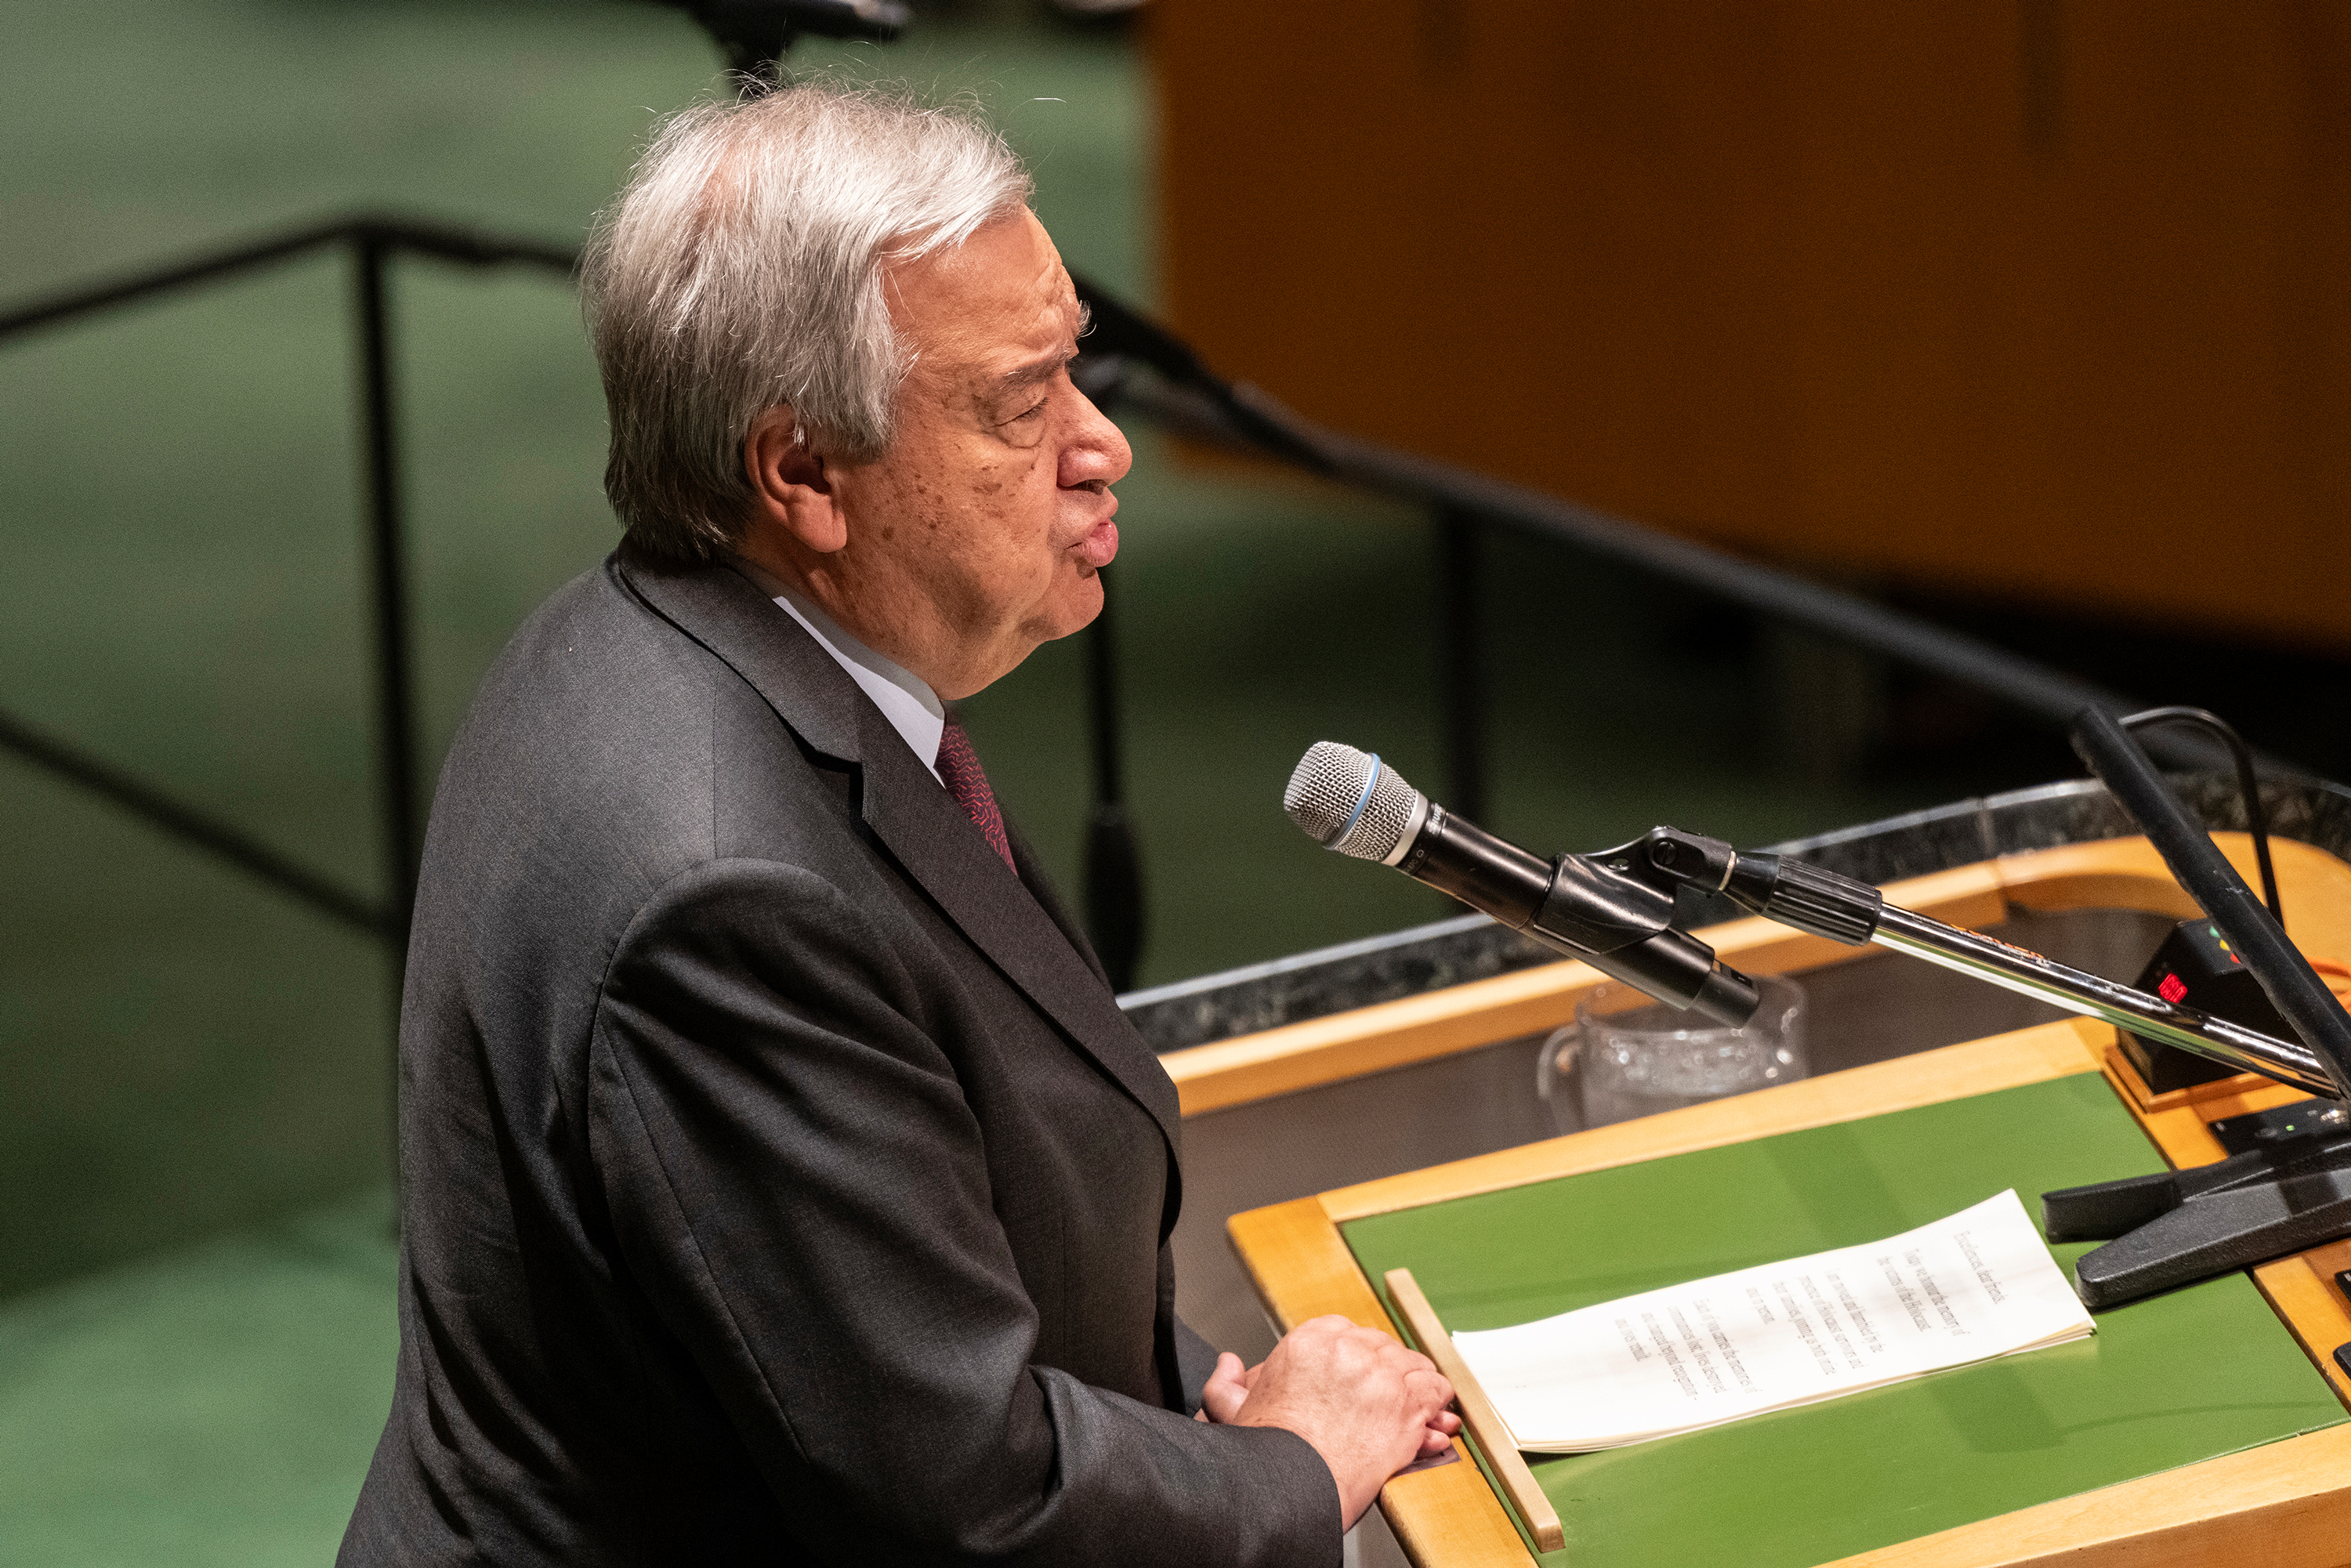 Antonio Guterres speaks during United Nations Holocaust Memorial Ceremony in observance of the International Day of Commemoration, at UN Headquarters in New York on January 26, 2024.